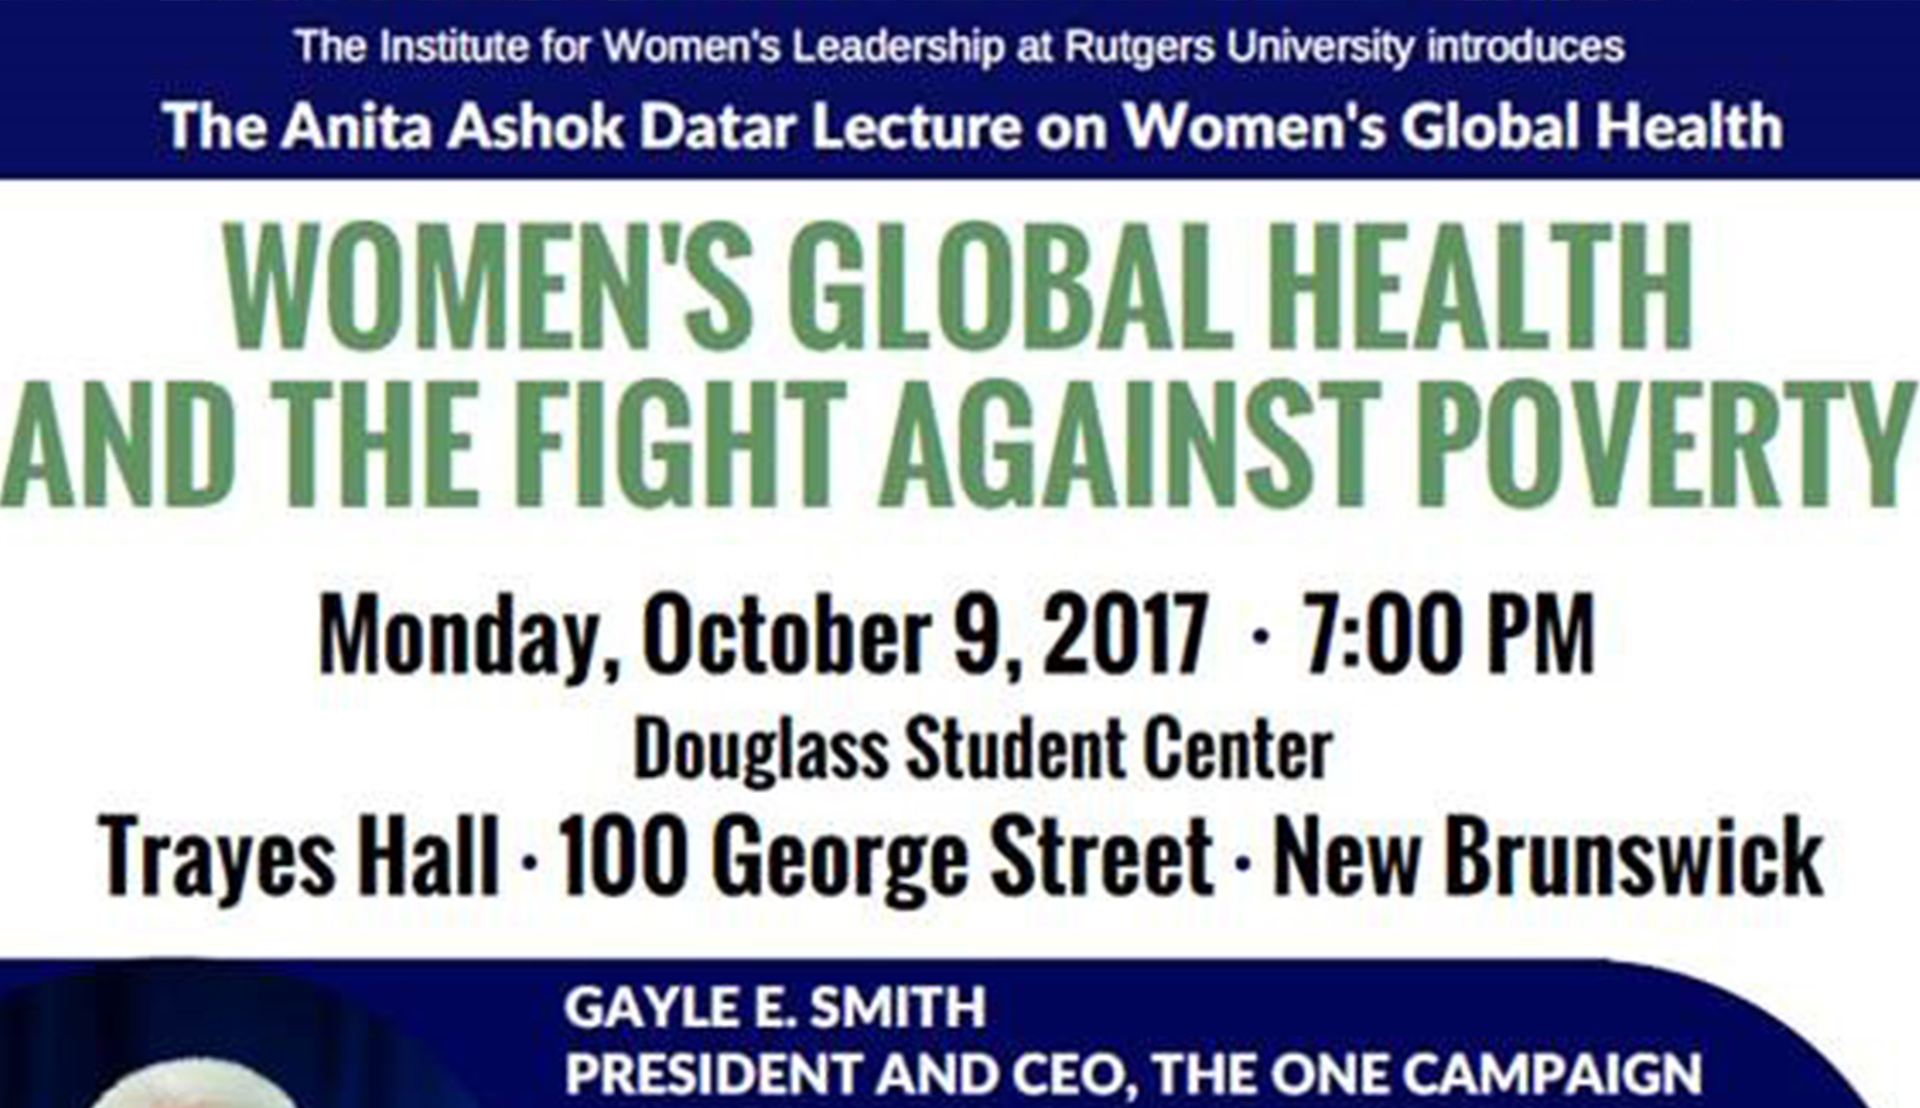 Women’s Global Health and the Fight Against Poverty